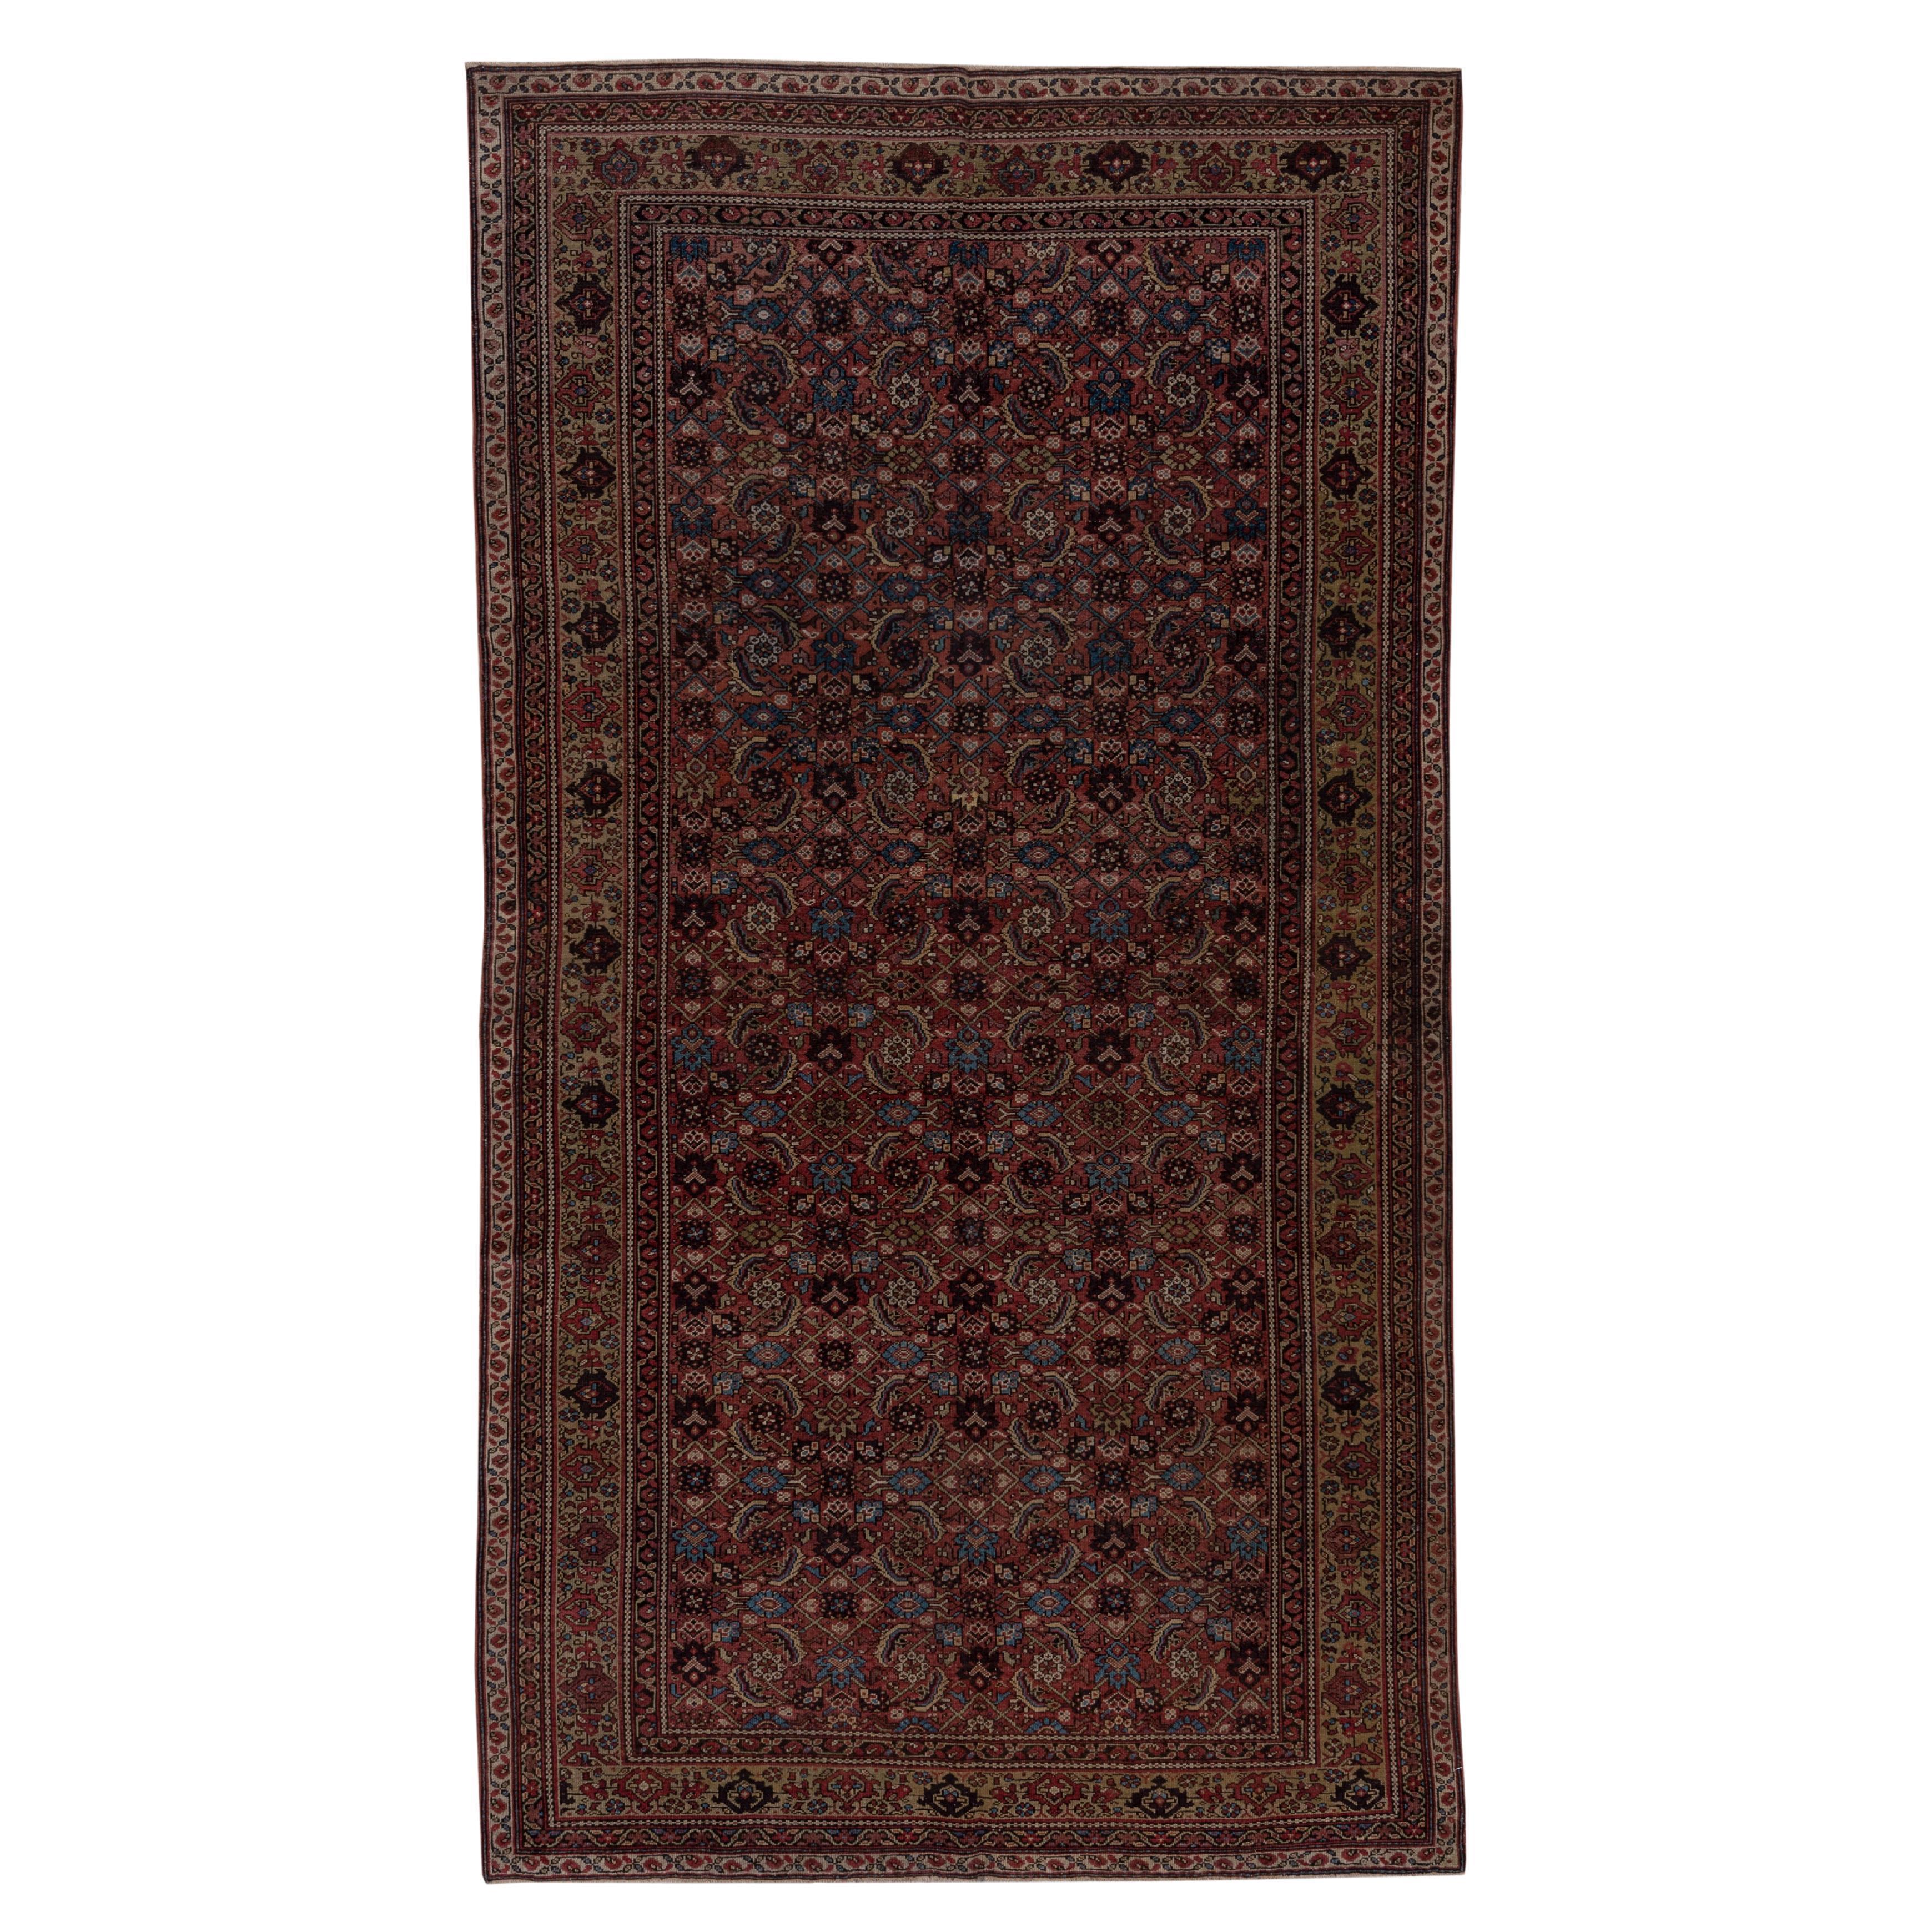 Antique Persian Malayer Gallery Rug with Warm Tones Herati Pattern, circa 1920s